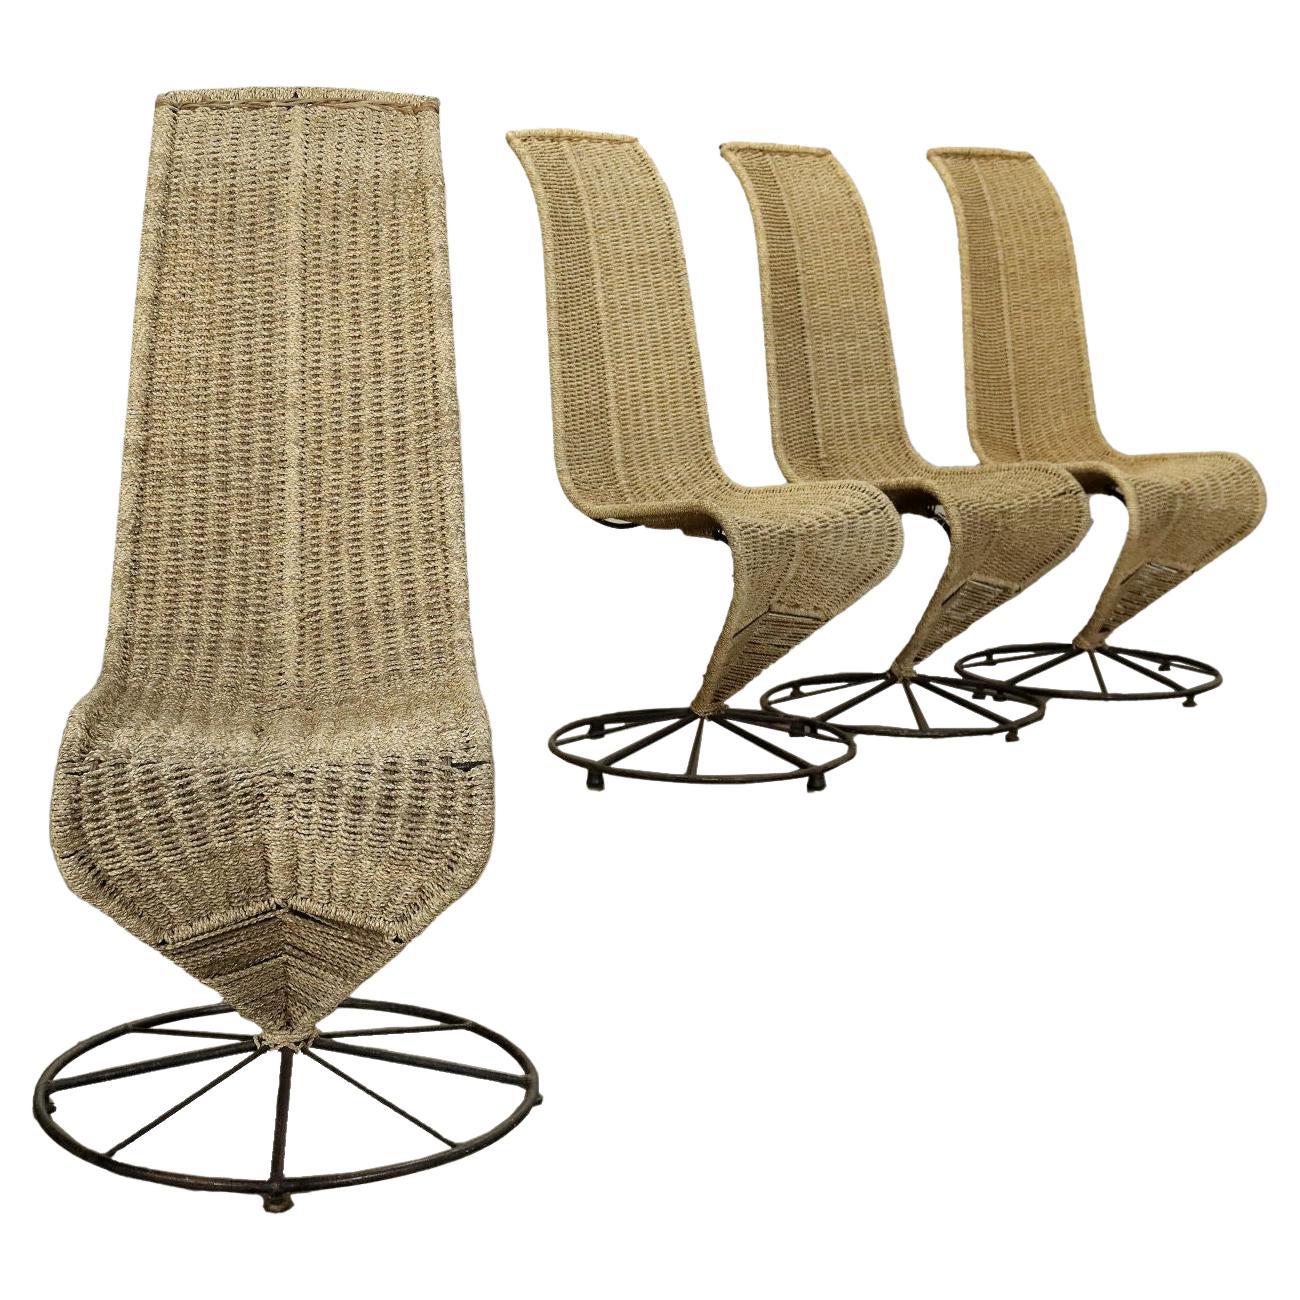 Group of 4 Most 'S' Chairs Rope, 1970s